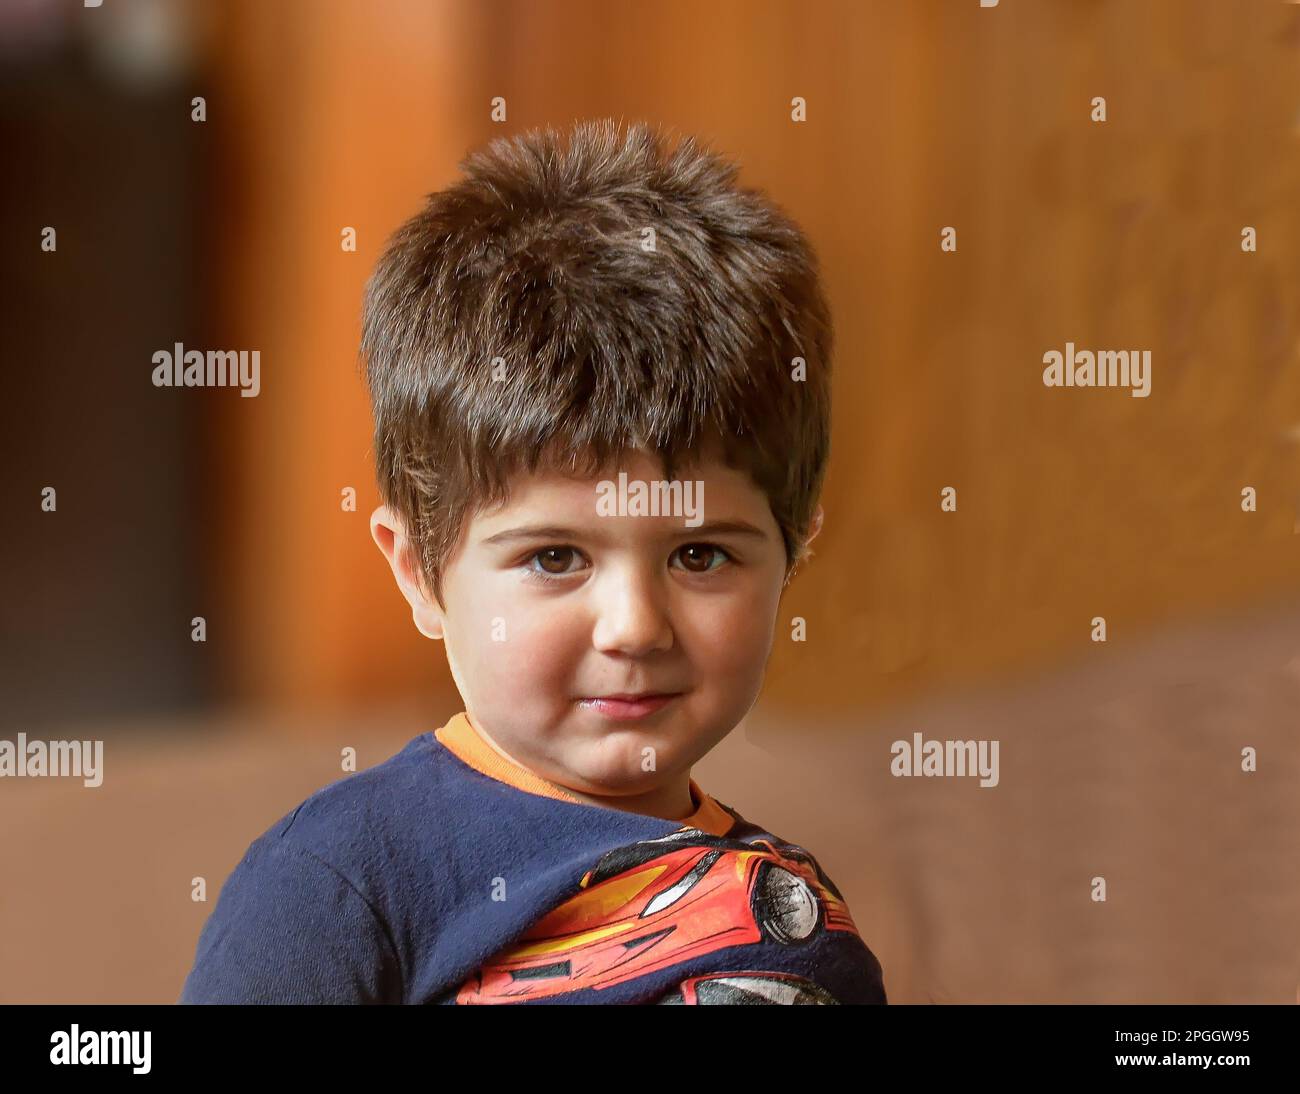 Portrait of 4-year-old boy Stock Photo